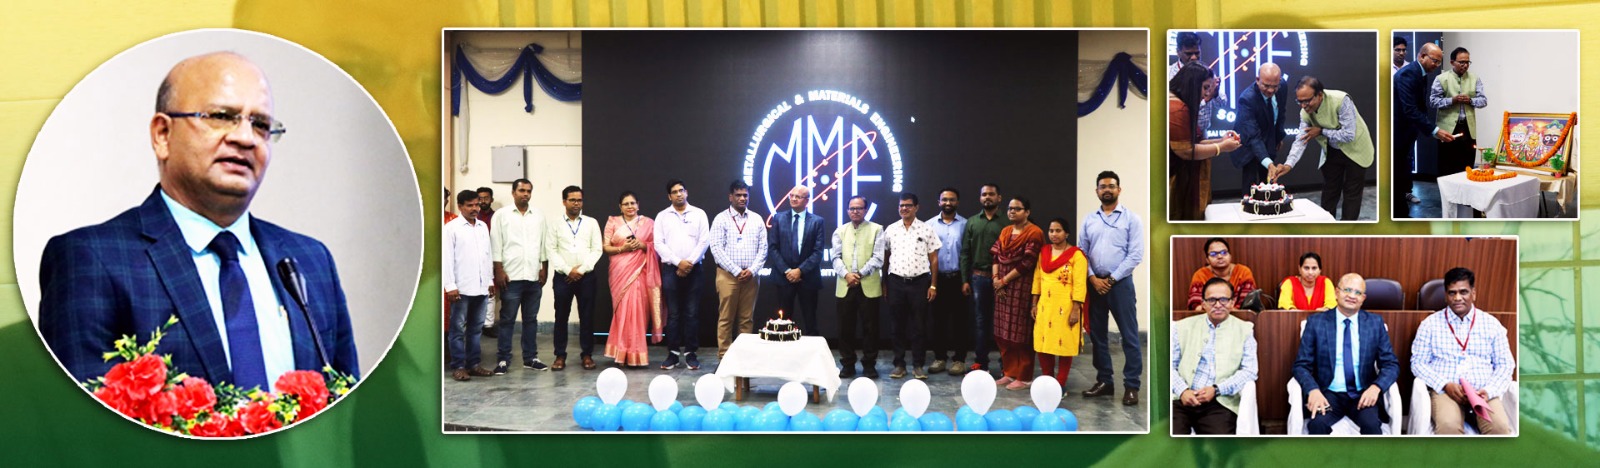 Address by Guest: Mr. Om Prakash Singh, Chairman Cum Managing Director, Mananadi Coal Field Limited
For National Technical Symphosium “Dravya 2K23” Organised by MME Society of Dept. of MME…!!!
